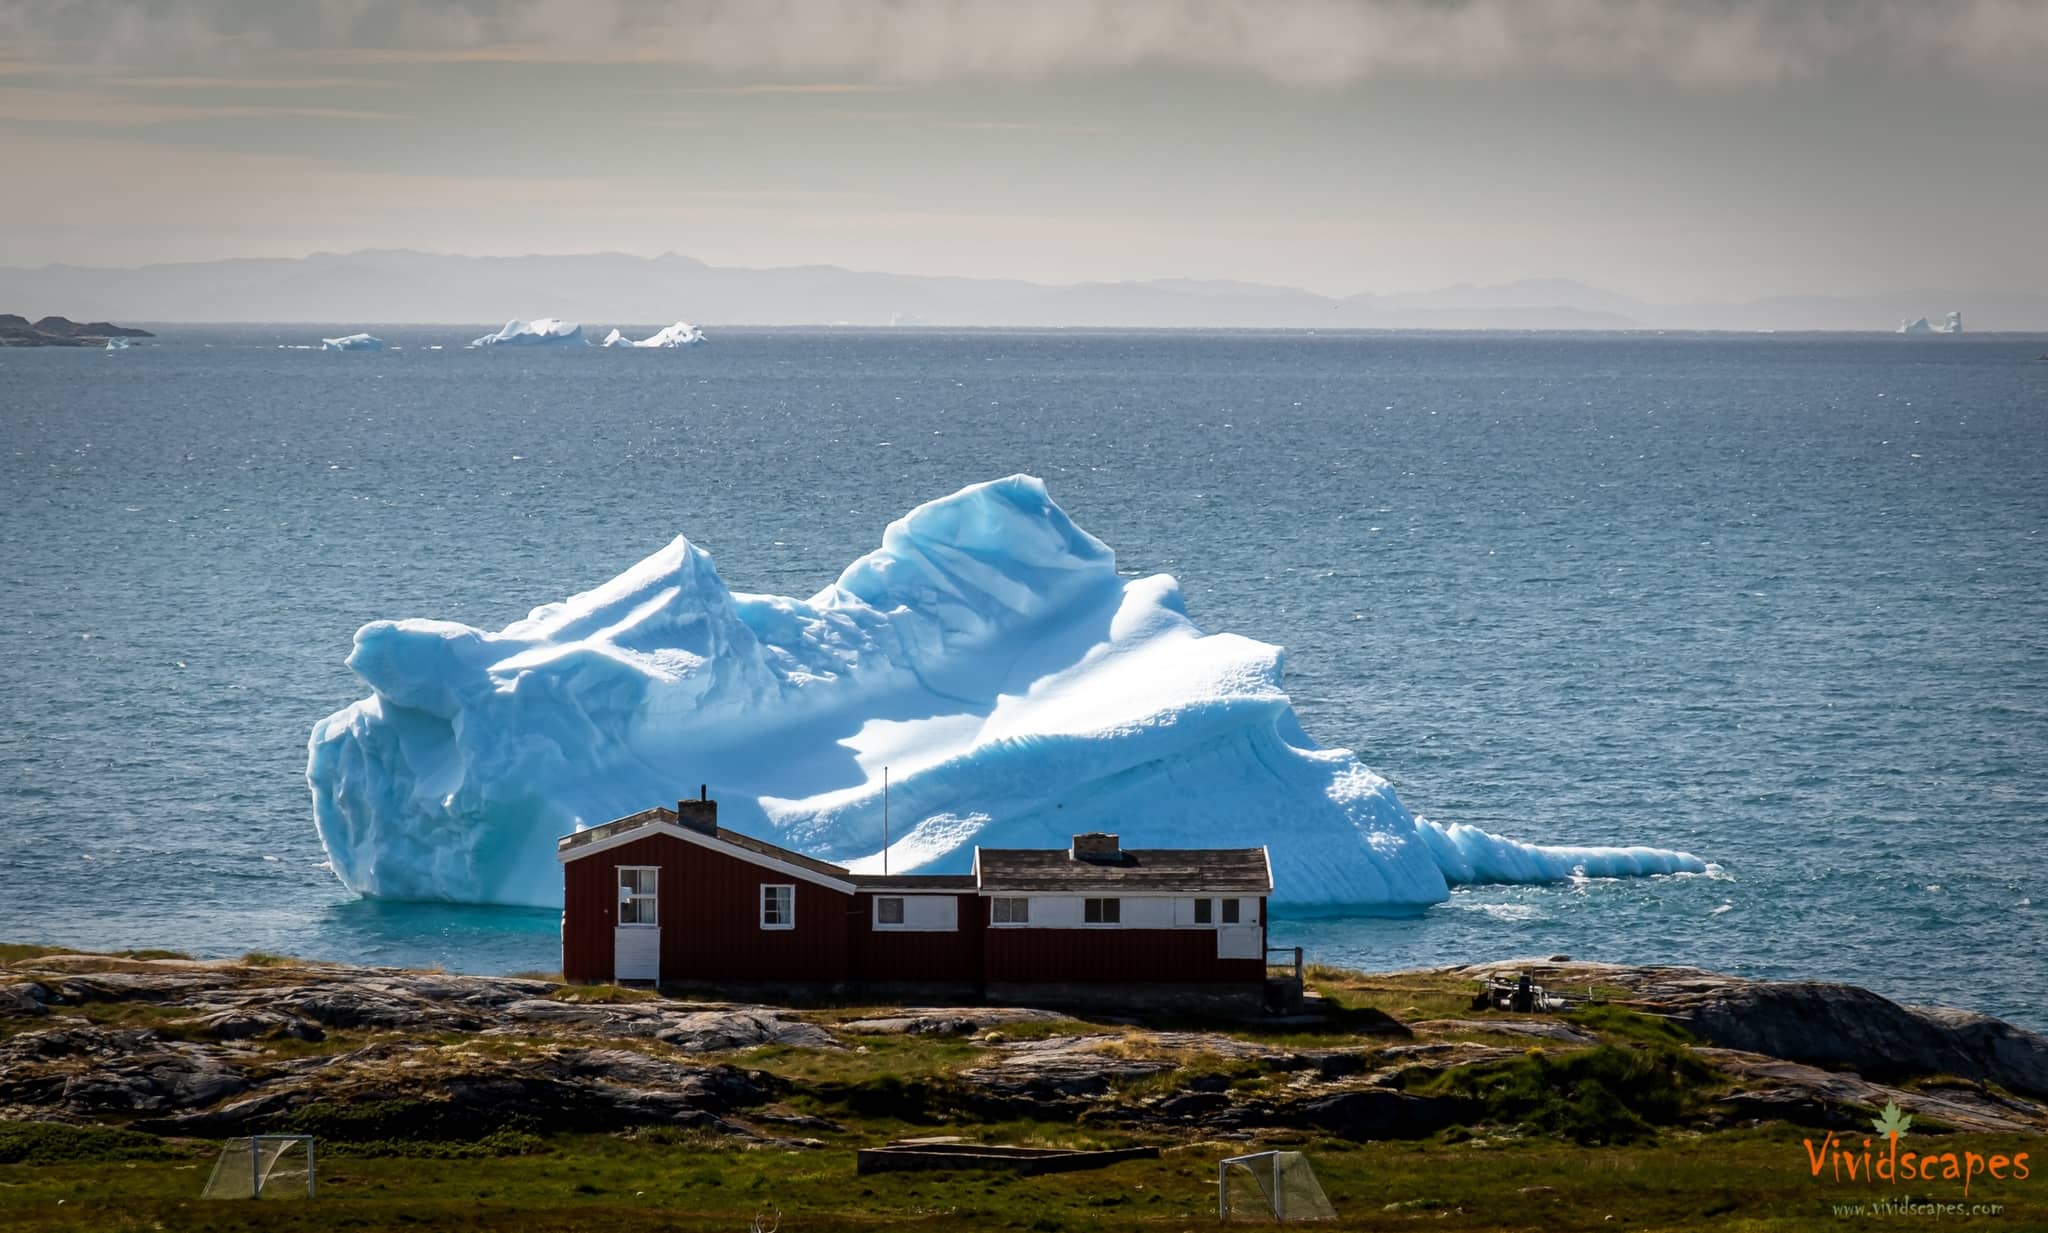 Greenland – The land of [N]ever Ending Ice